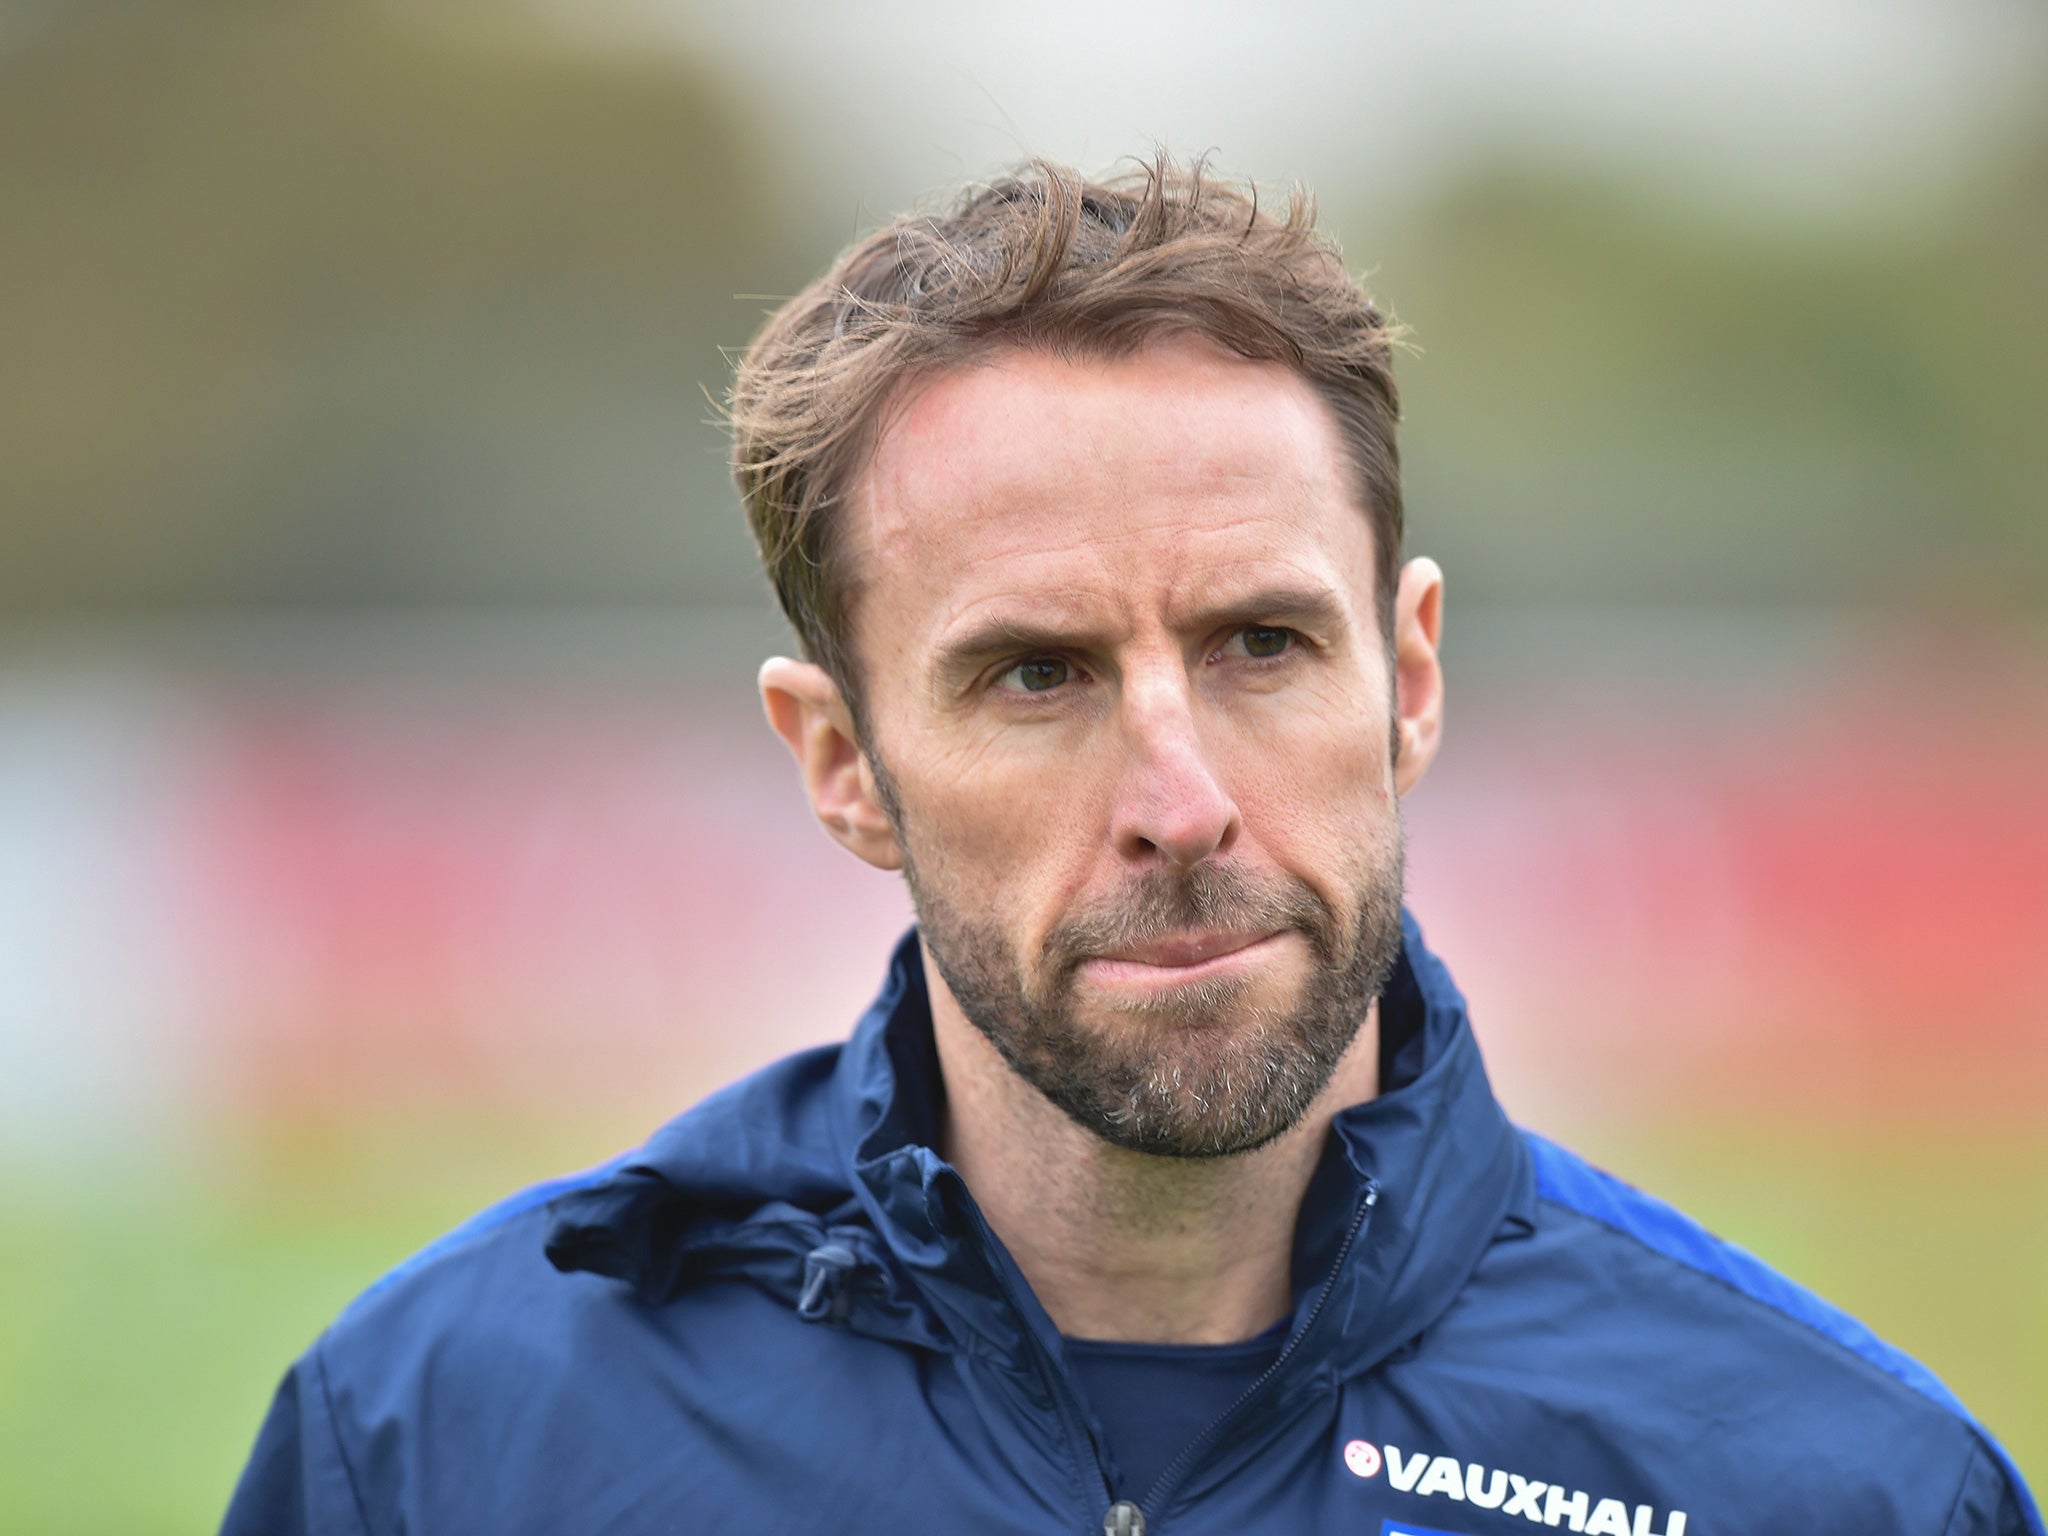 Southgate will earn £1.5m a year from the Football Association